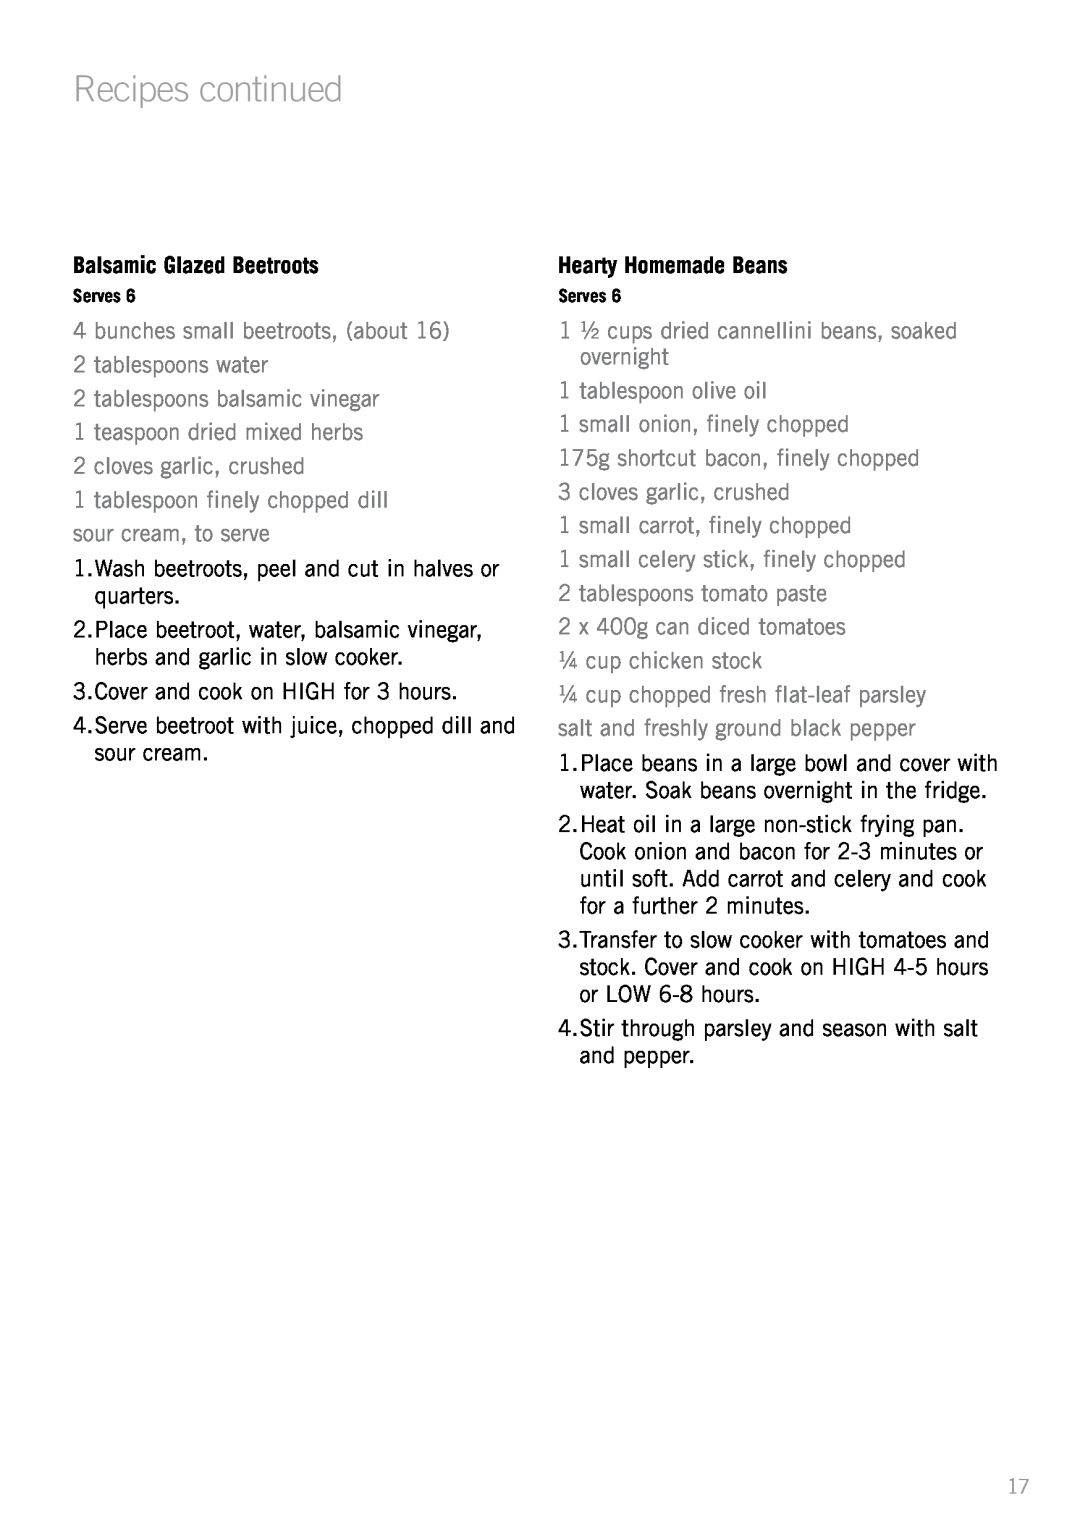 Sunbeam HP5590 manual Balsamic Glazed Beetroots, Hearty Homemade Beans, Recipes continued 